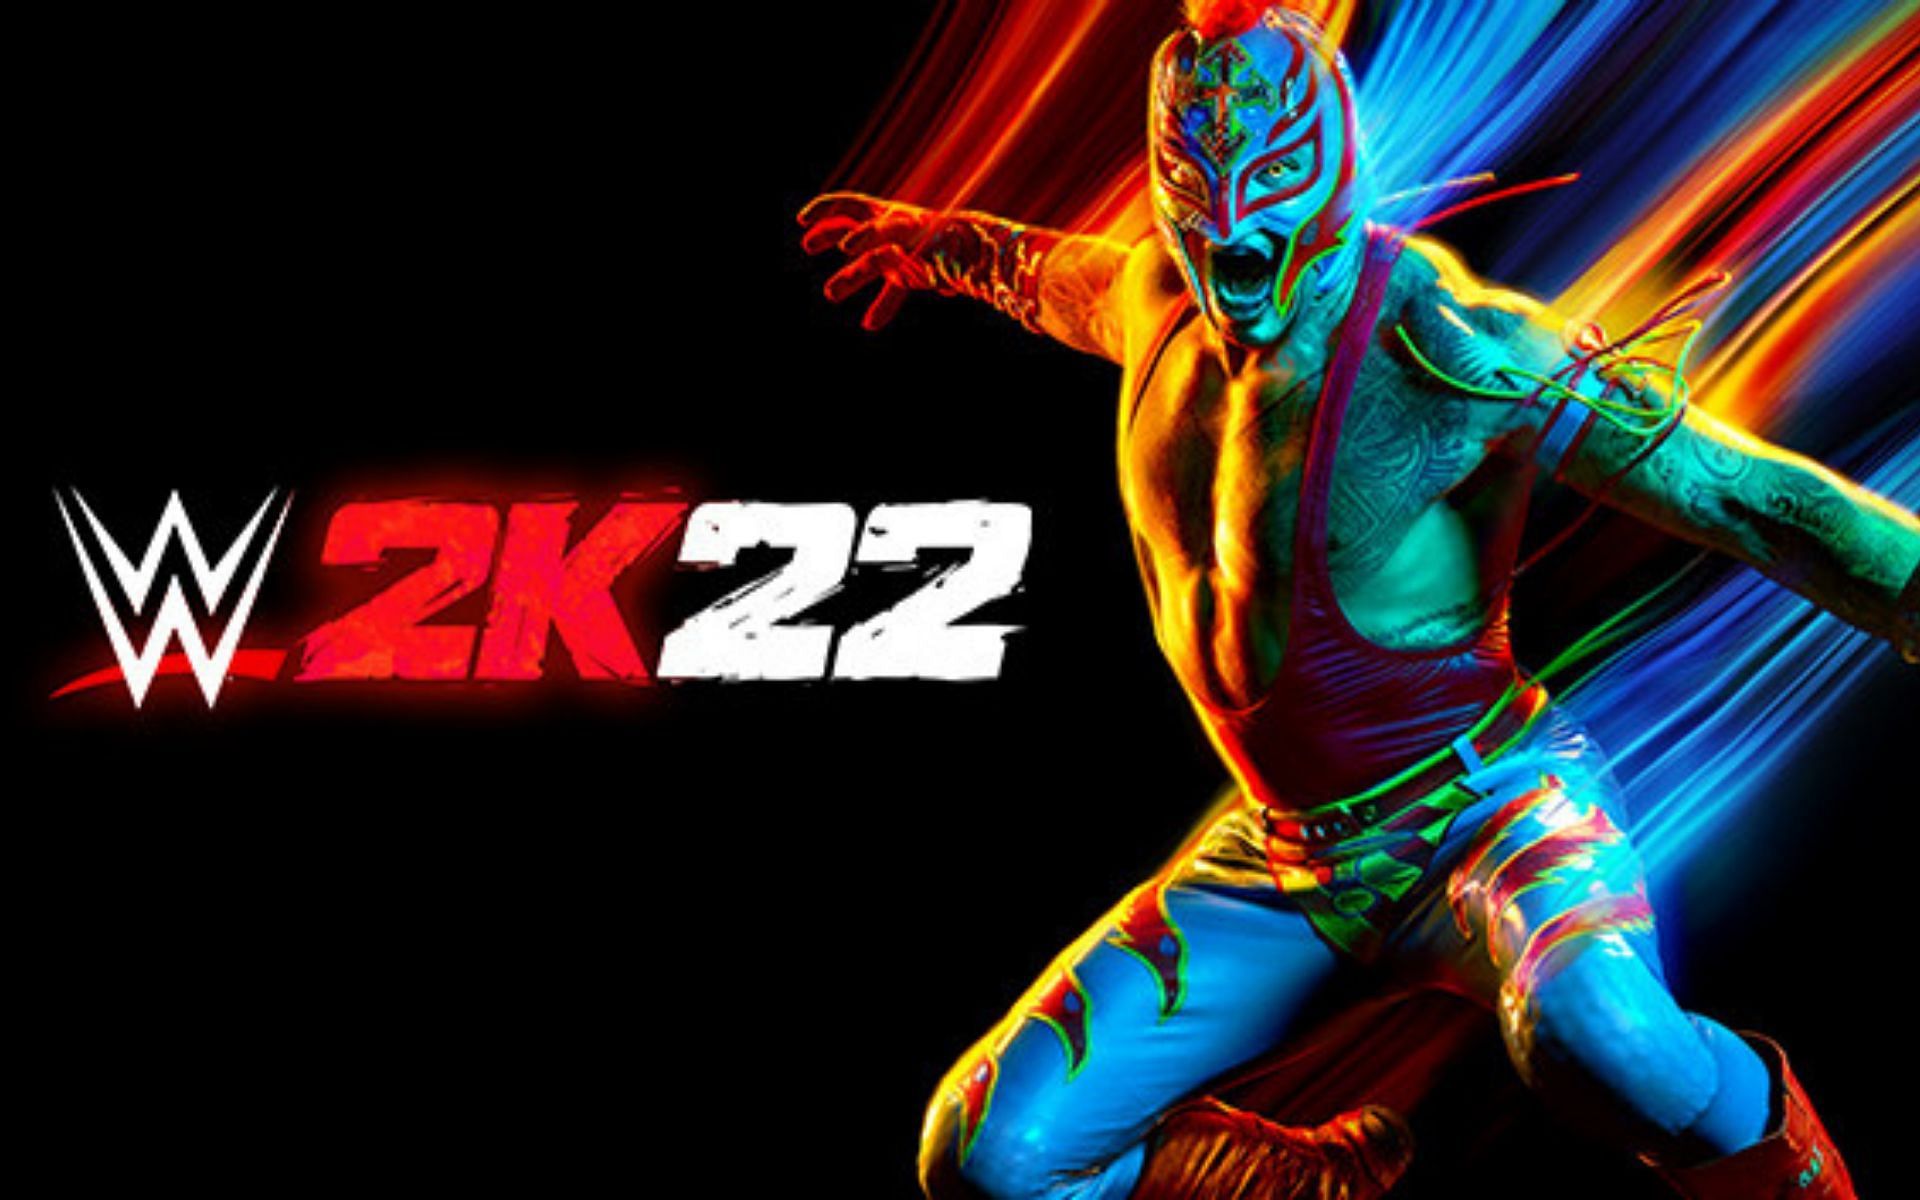 WWE 2K22 was launched in March